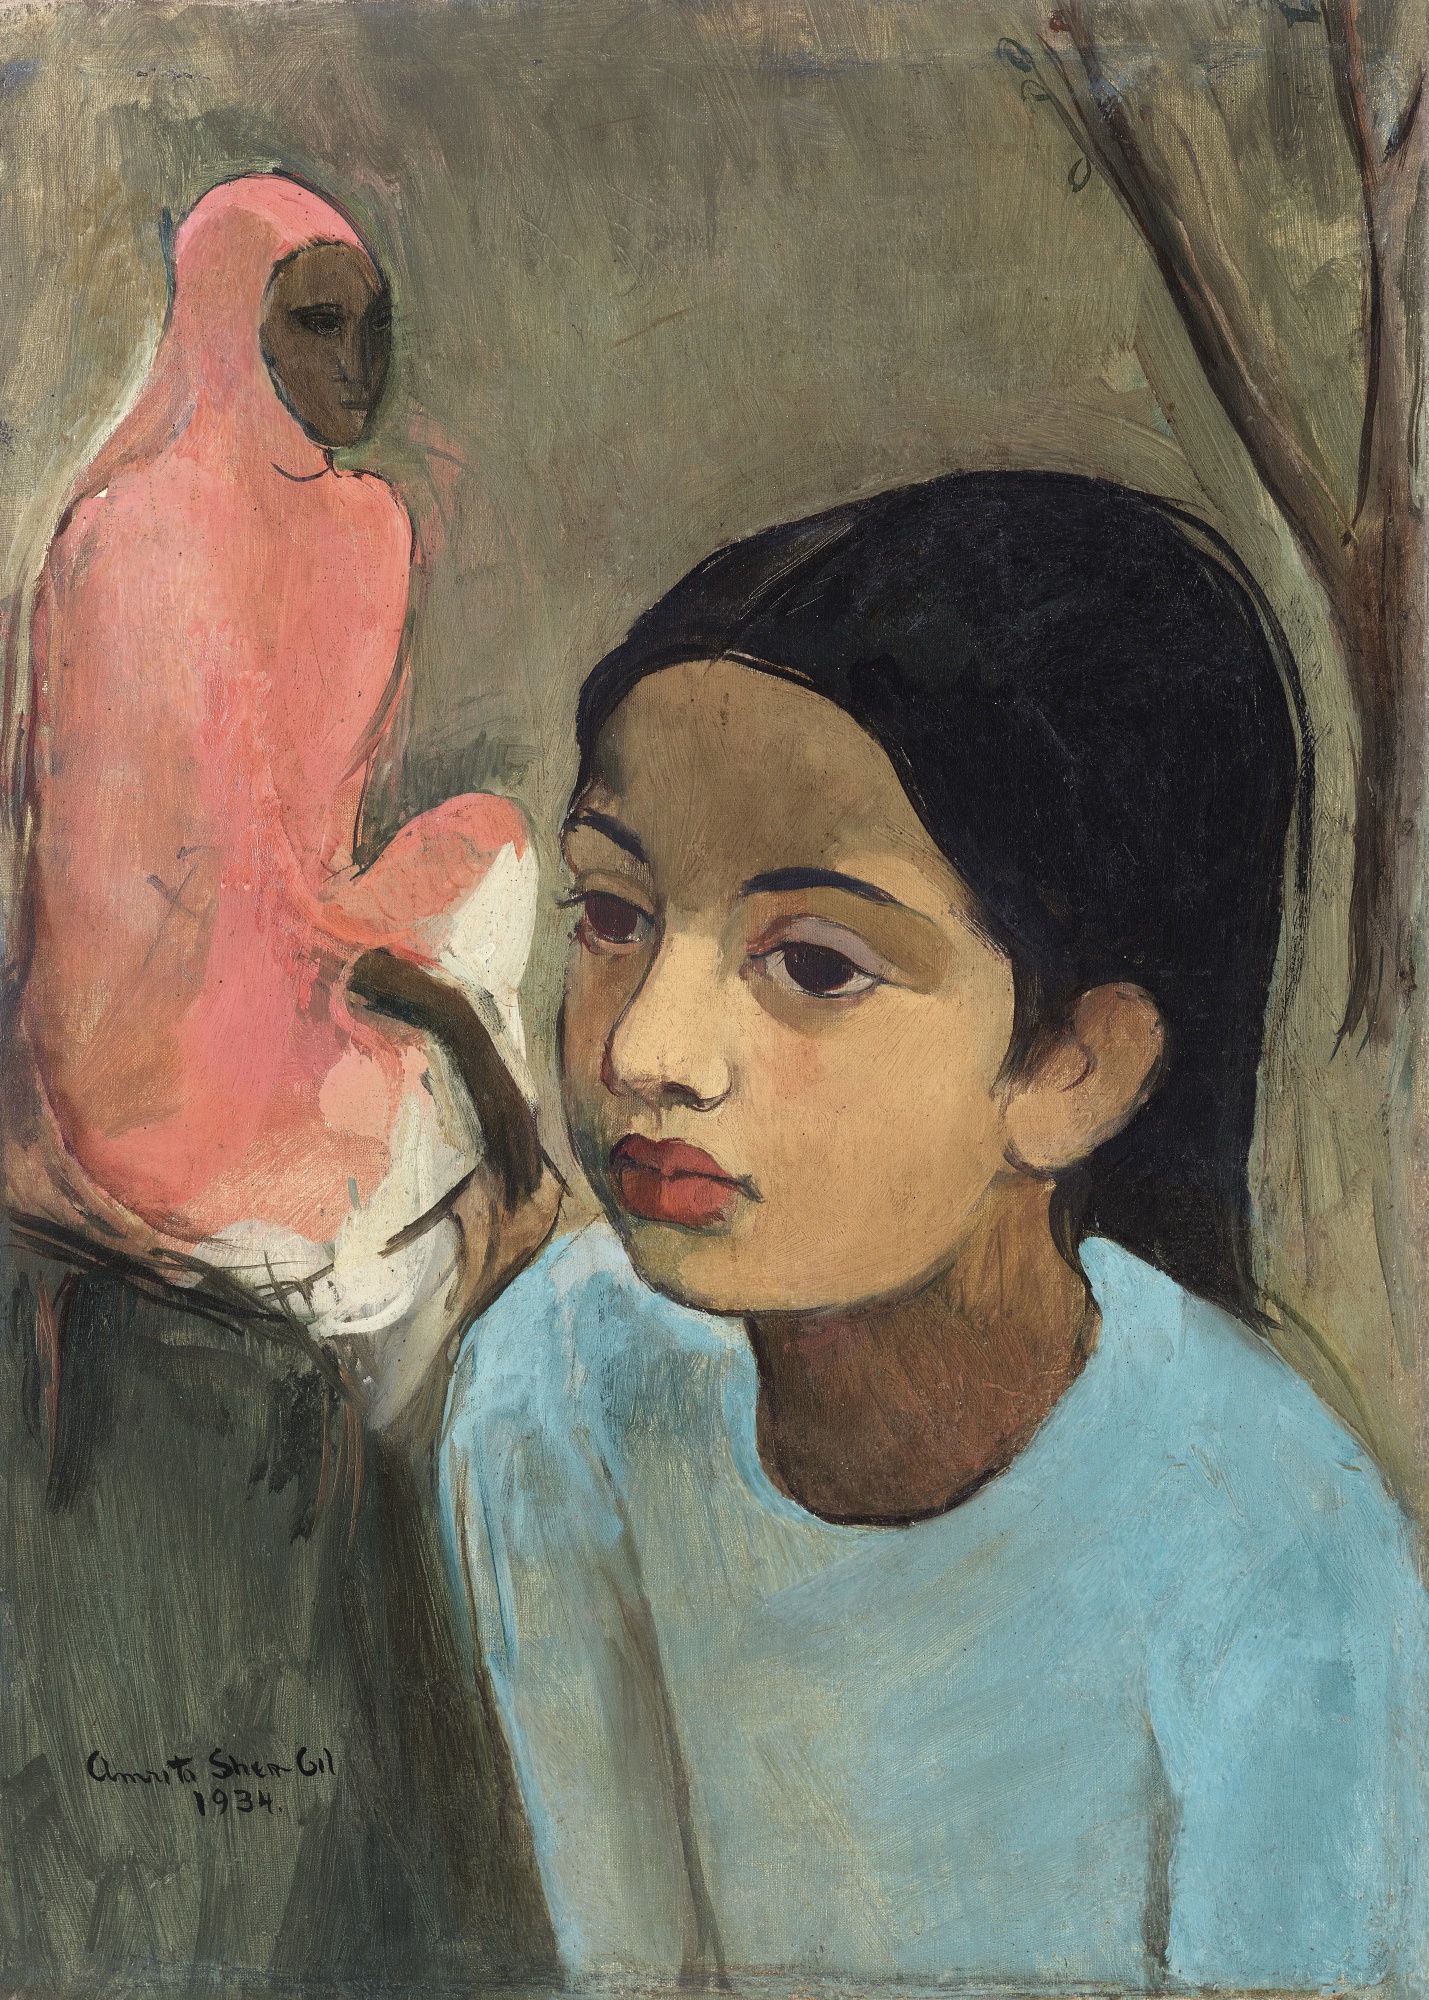 The little girl in blue by Amrita Sher-Gil - 1934 - 48 x 40.6 cm private collection